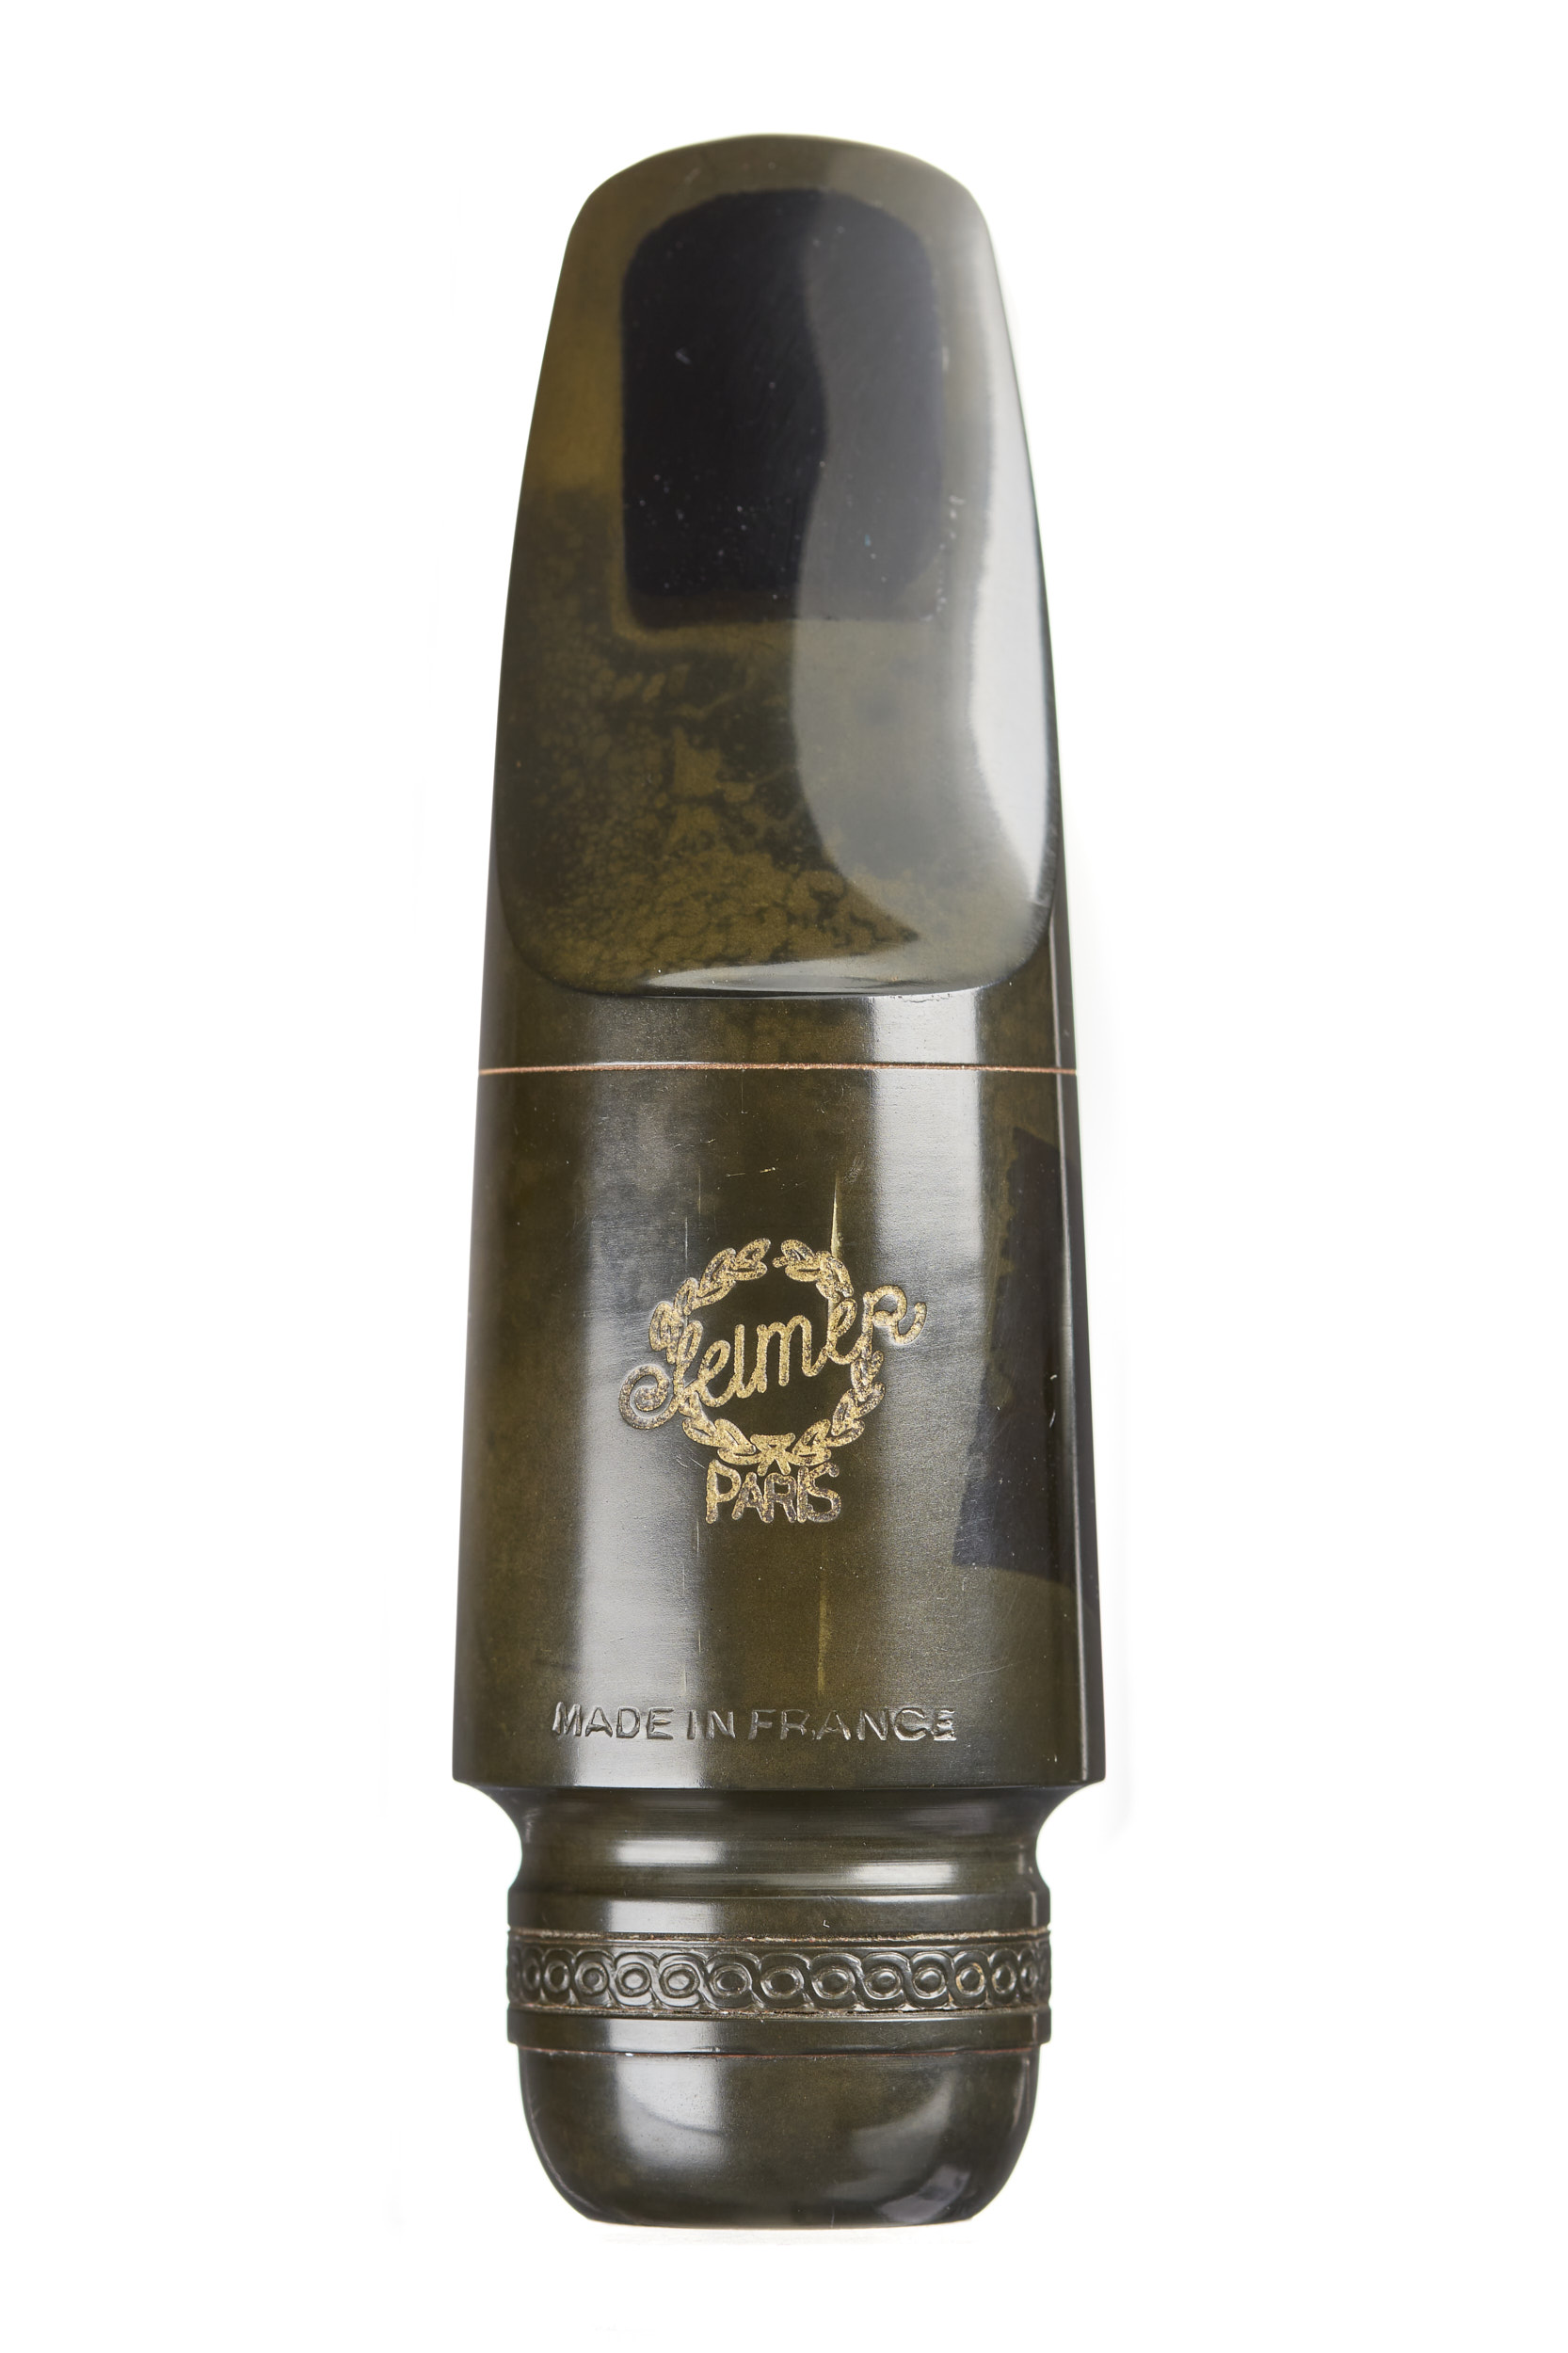 (Used) Selmer Soloist Short Shank C* Tenor Sax Mouthpiece refaced to 7* by  Ed Pillinger - Headwind Music